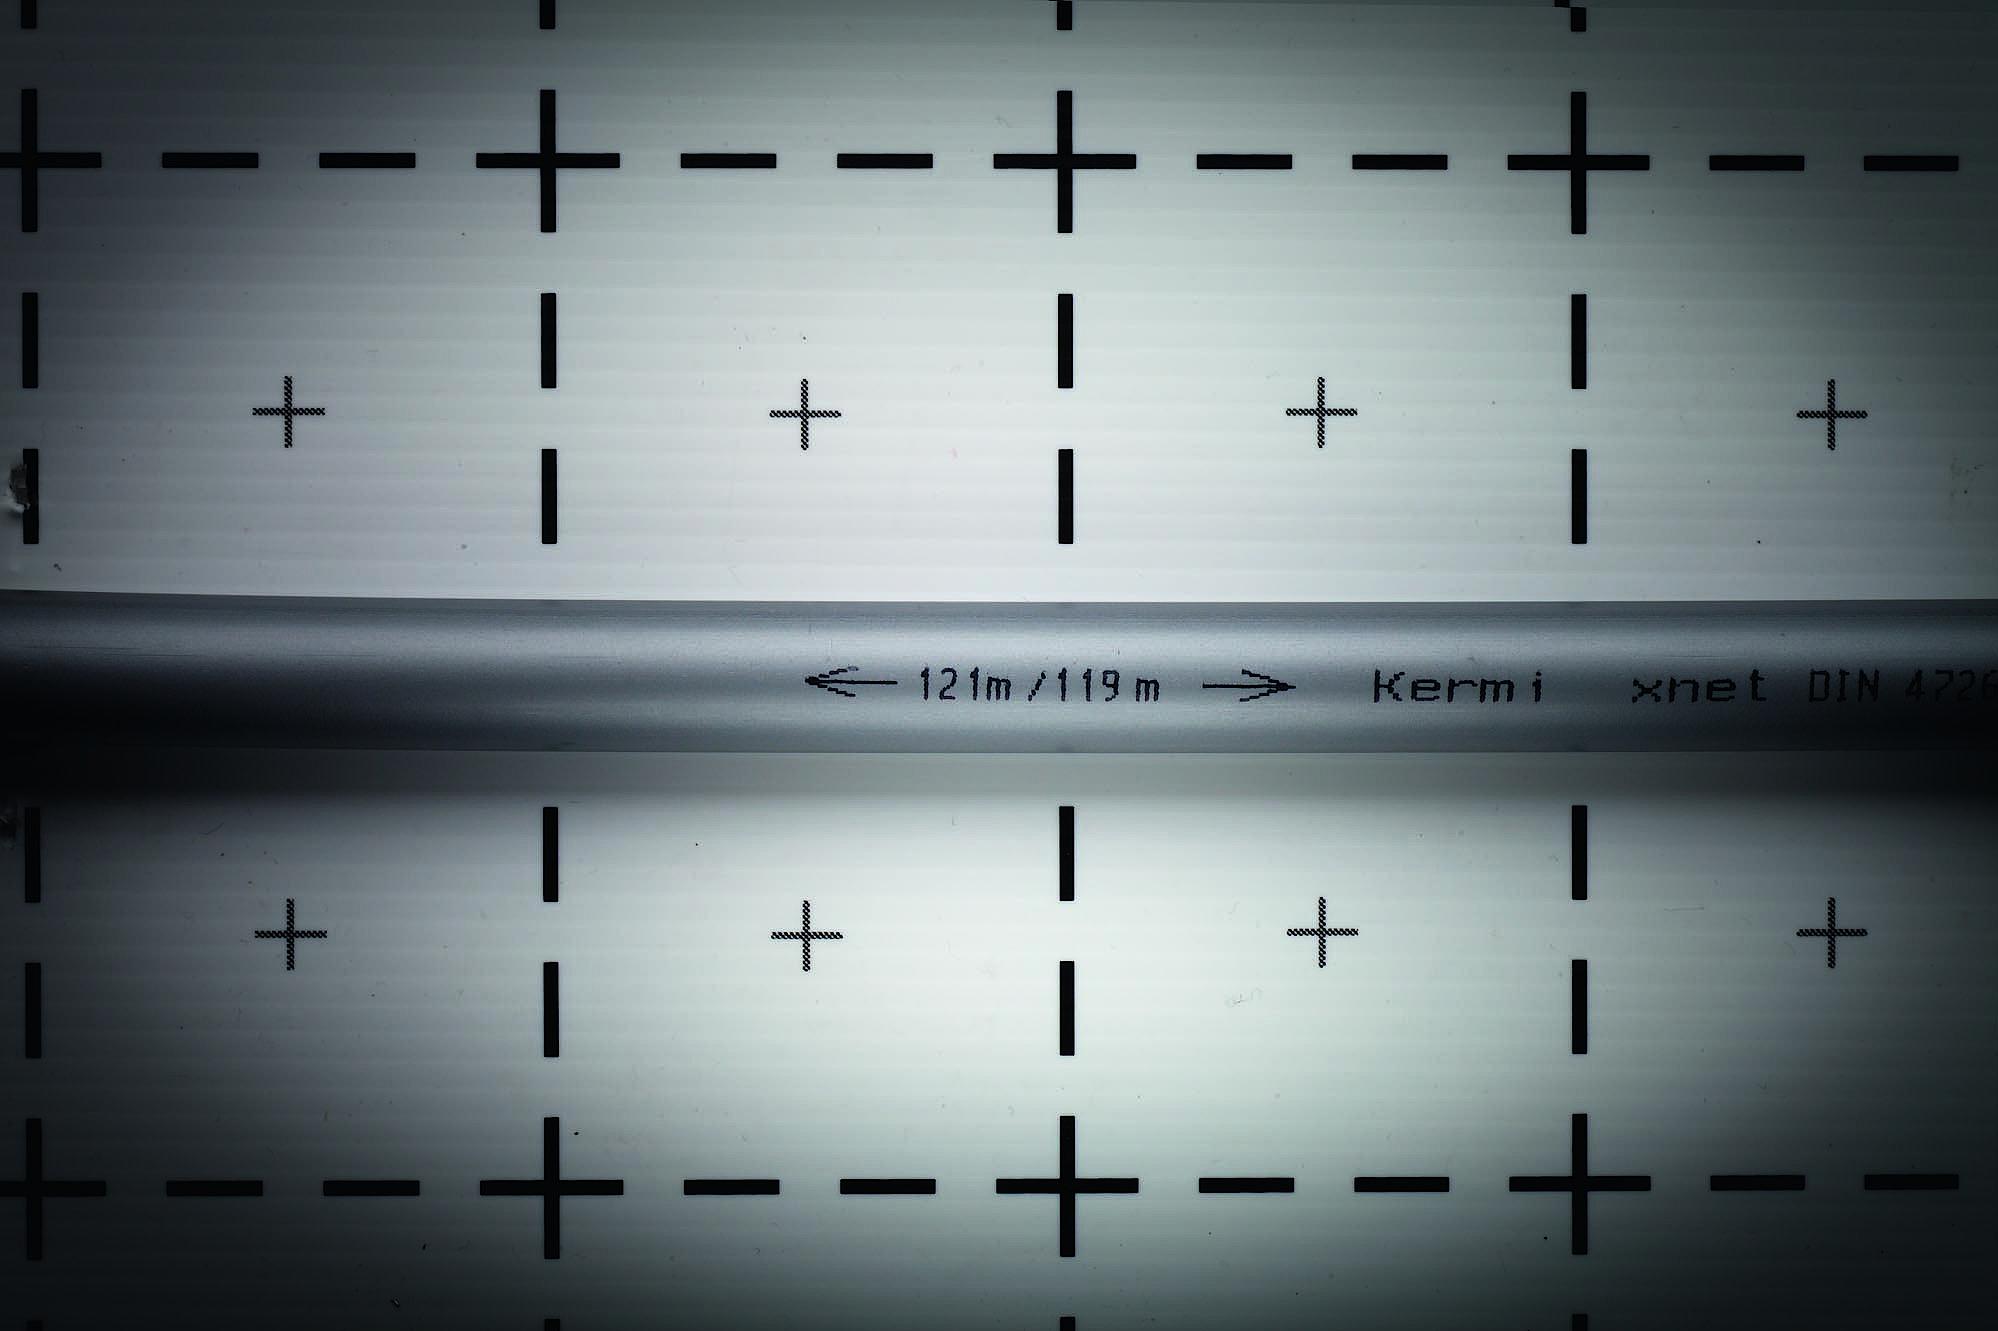 Kermi x-net 5-layer PE-Xc pipes have marks printed on them to indicate the remaining length and pipe length already used, thereby ensuring optimal utilisation of pipe coils.